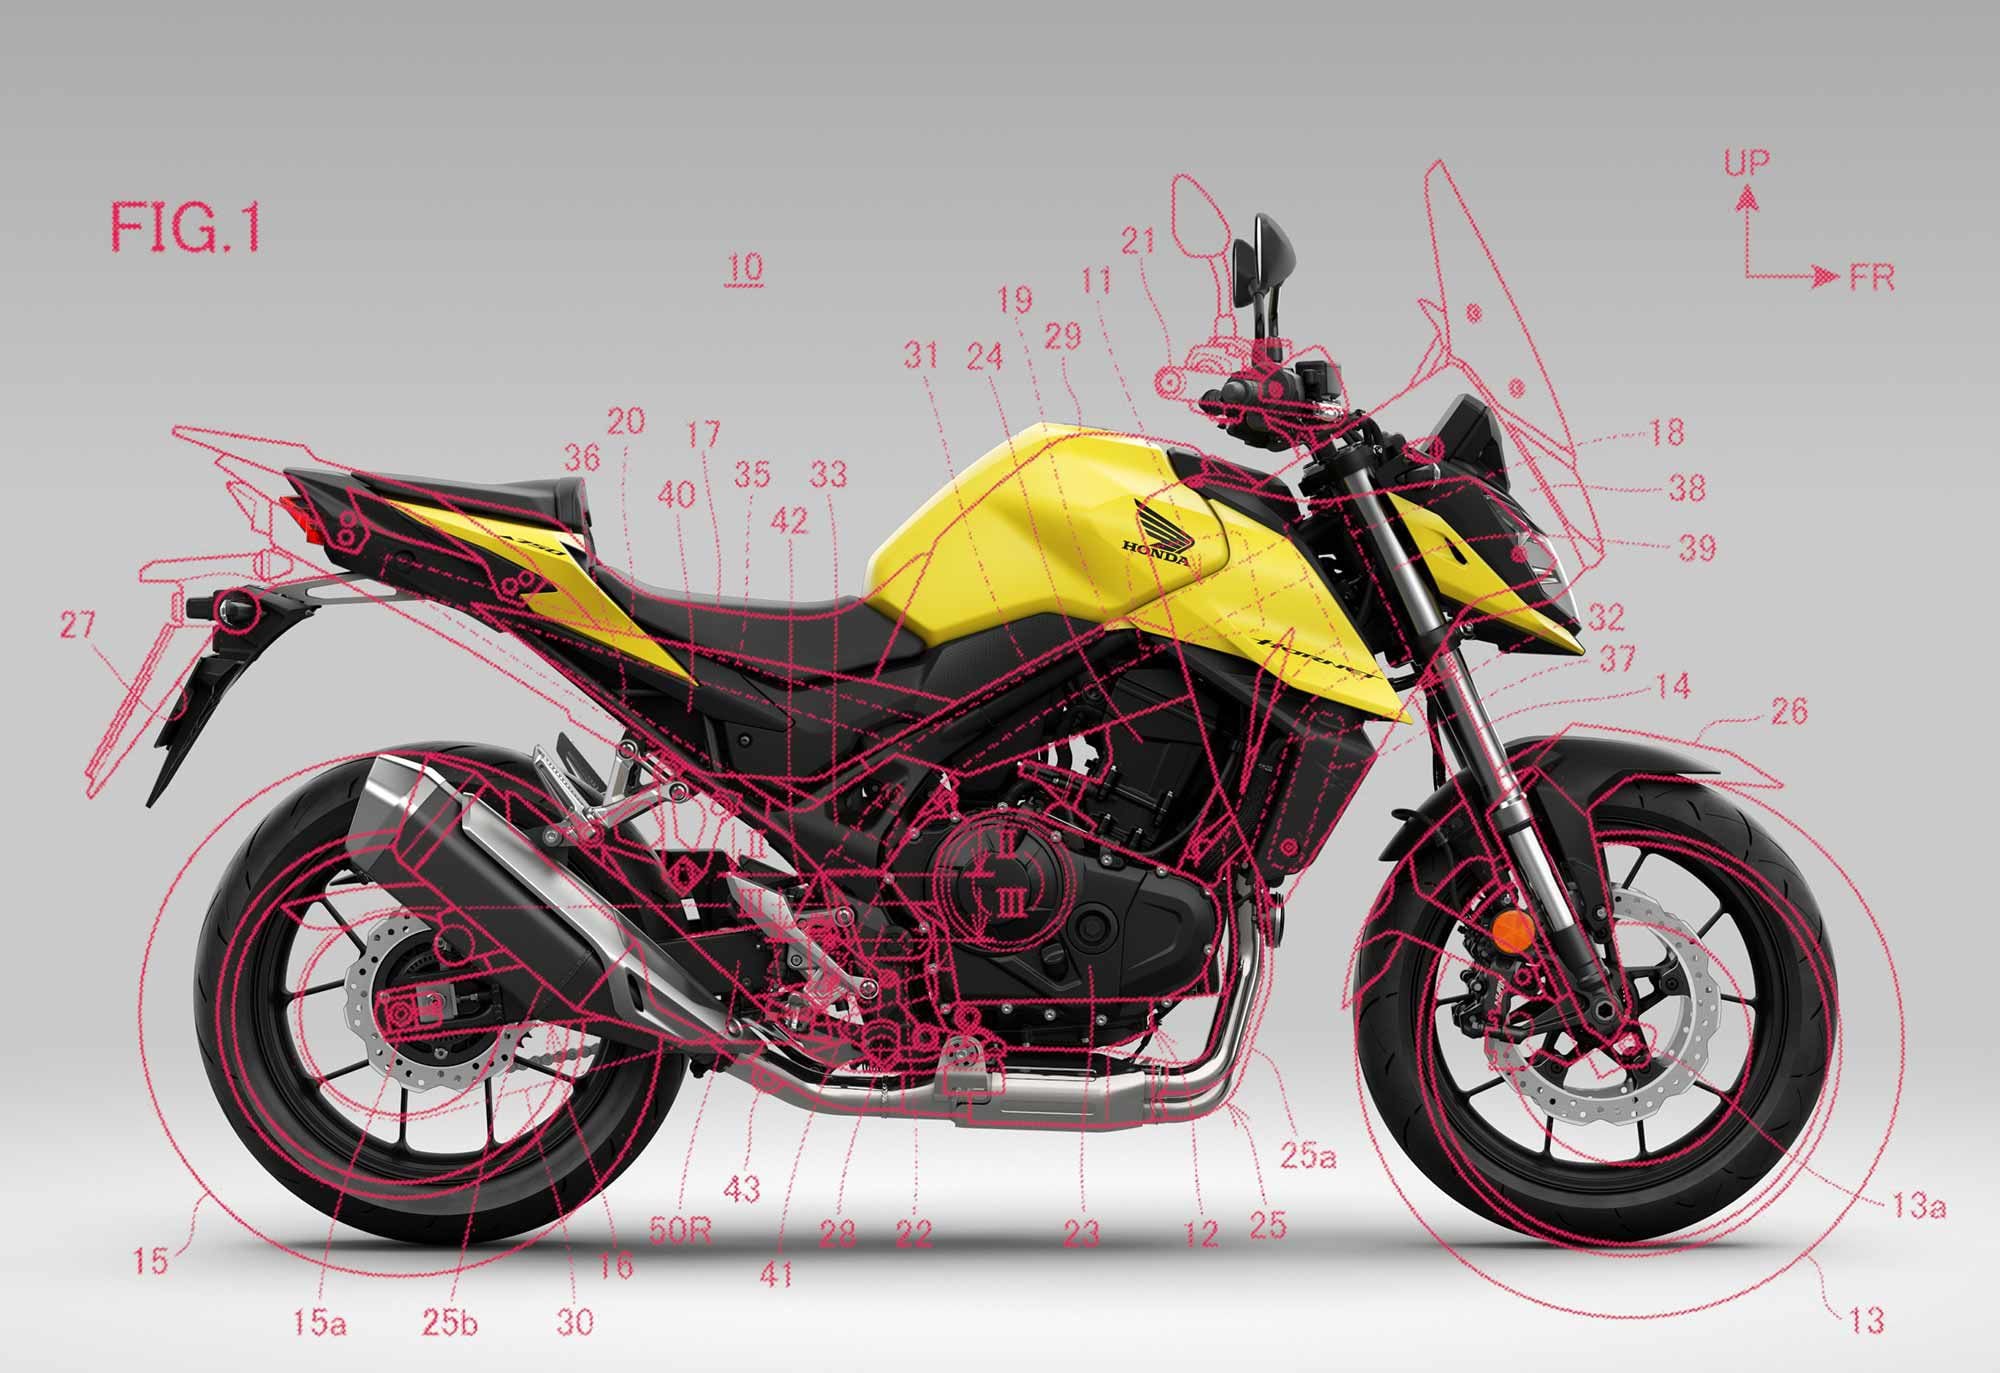 This overlay shows how the new Transalp 750 will differ from its stablemate, the CB750 Hornet.